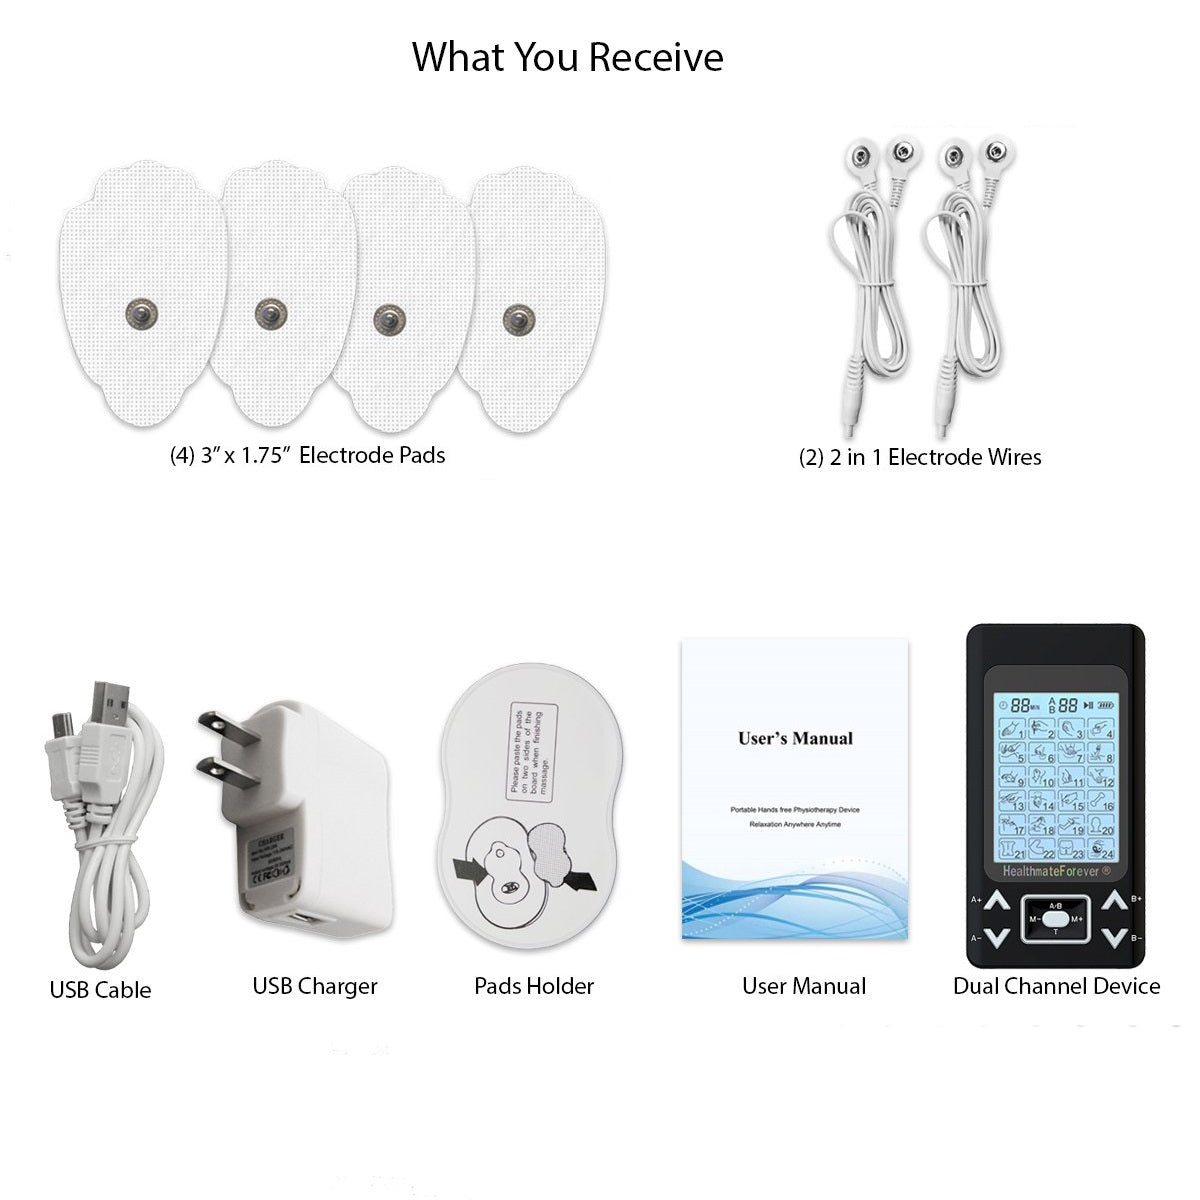 Up To 80% Off on TENS Unit Pulse Massagers TEN